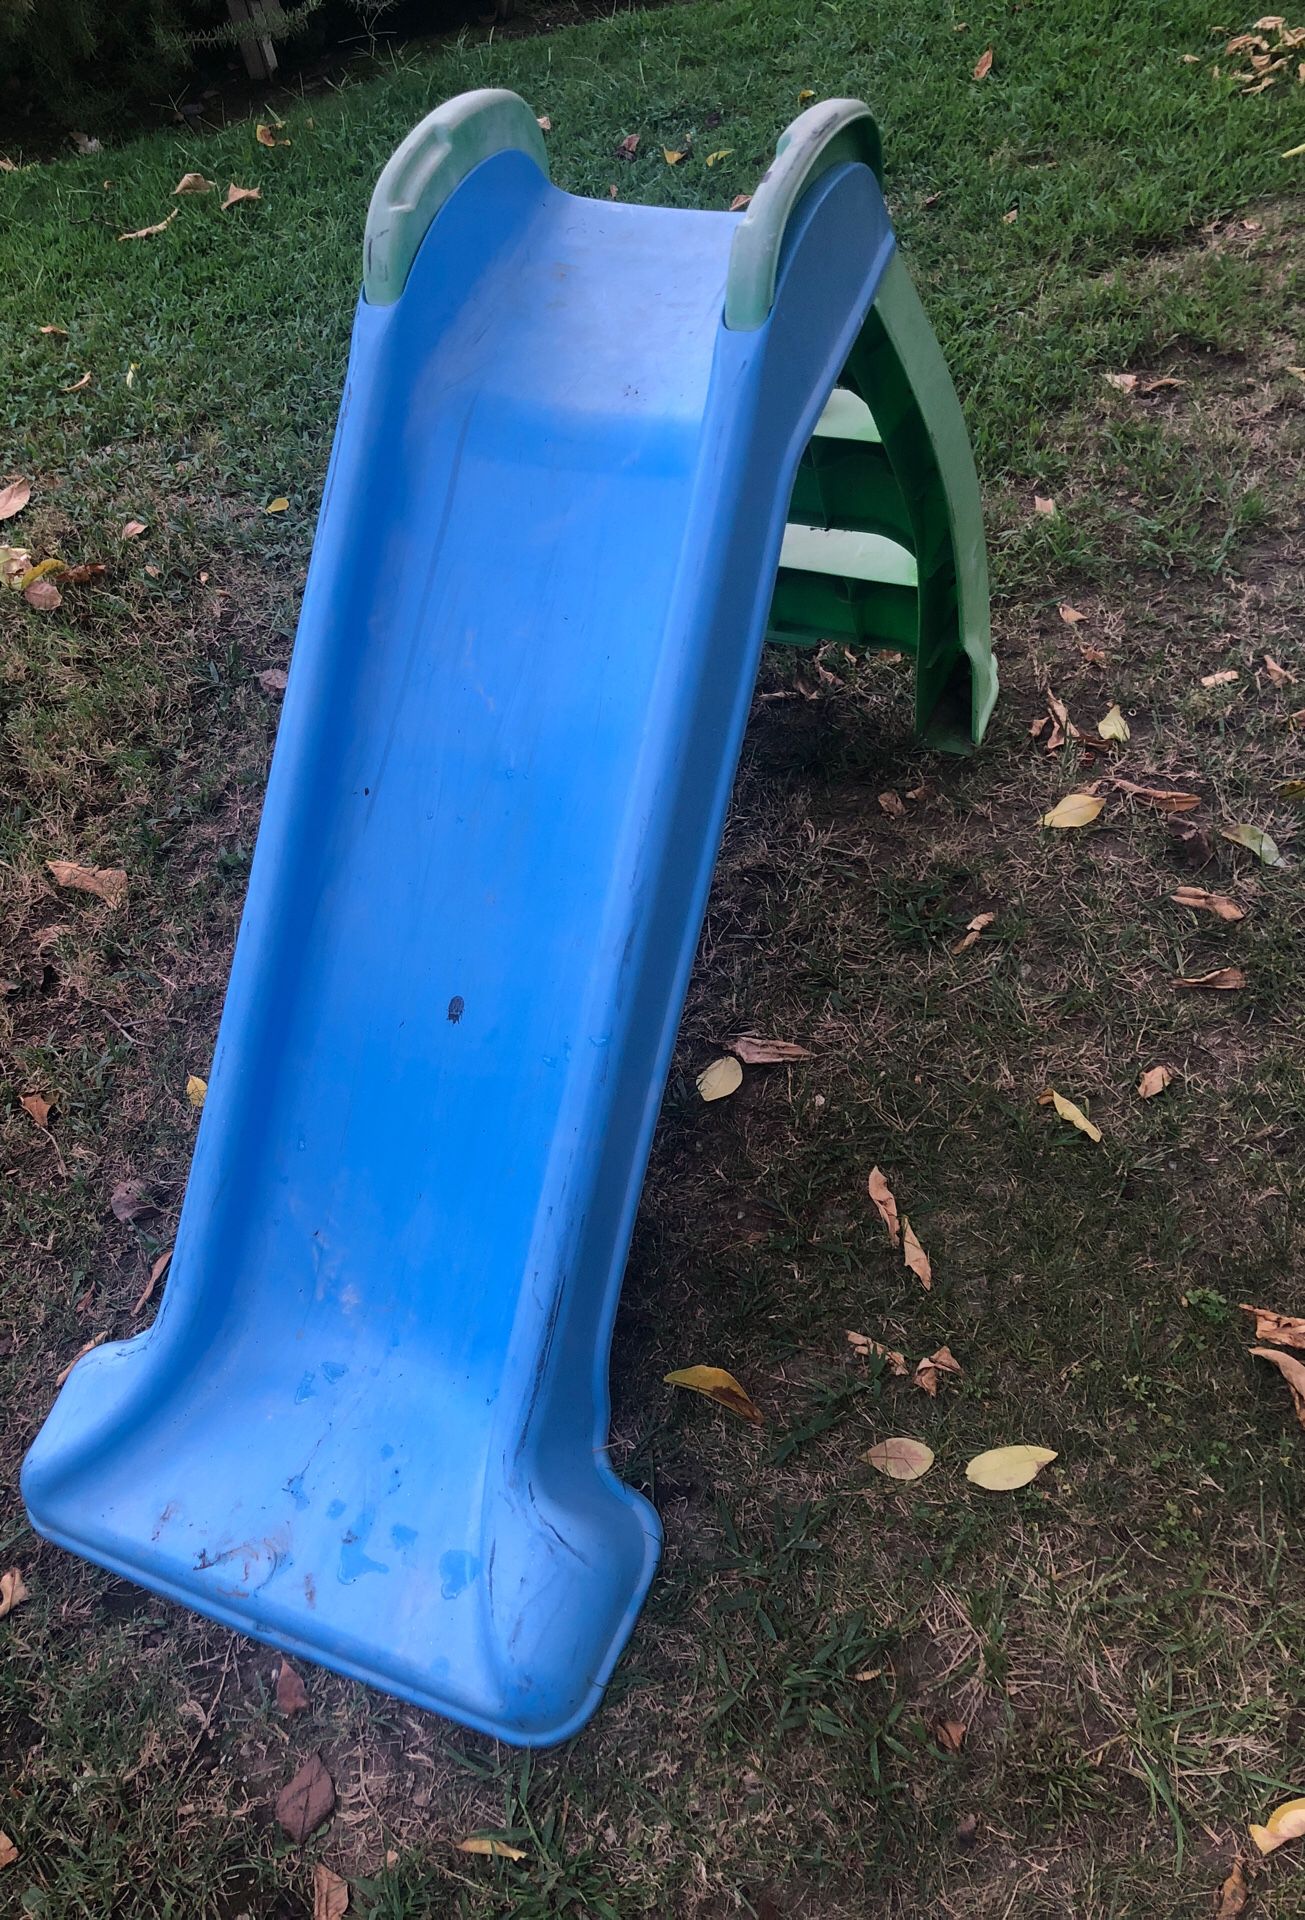 Little tikes blue and green play set swing slide and picnic table